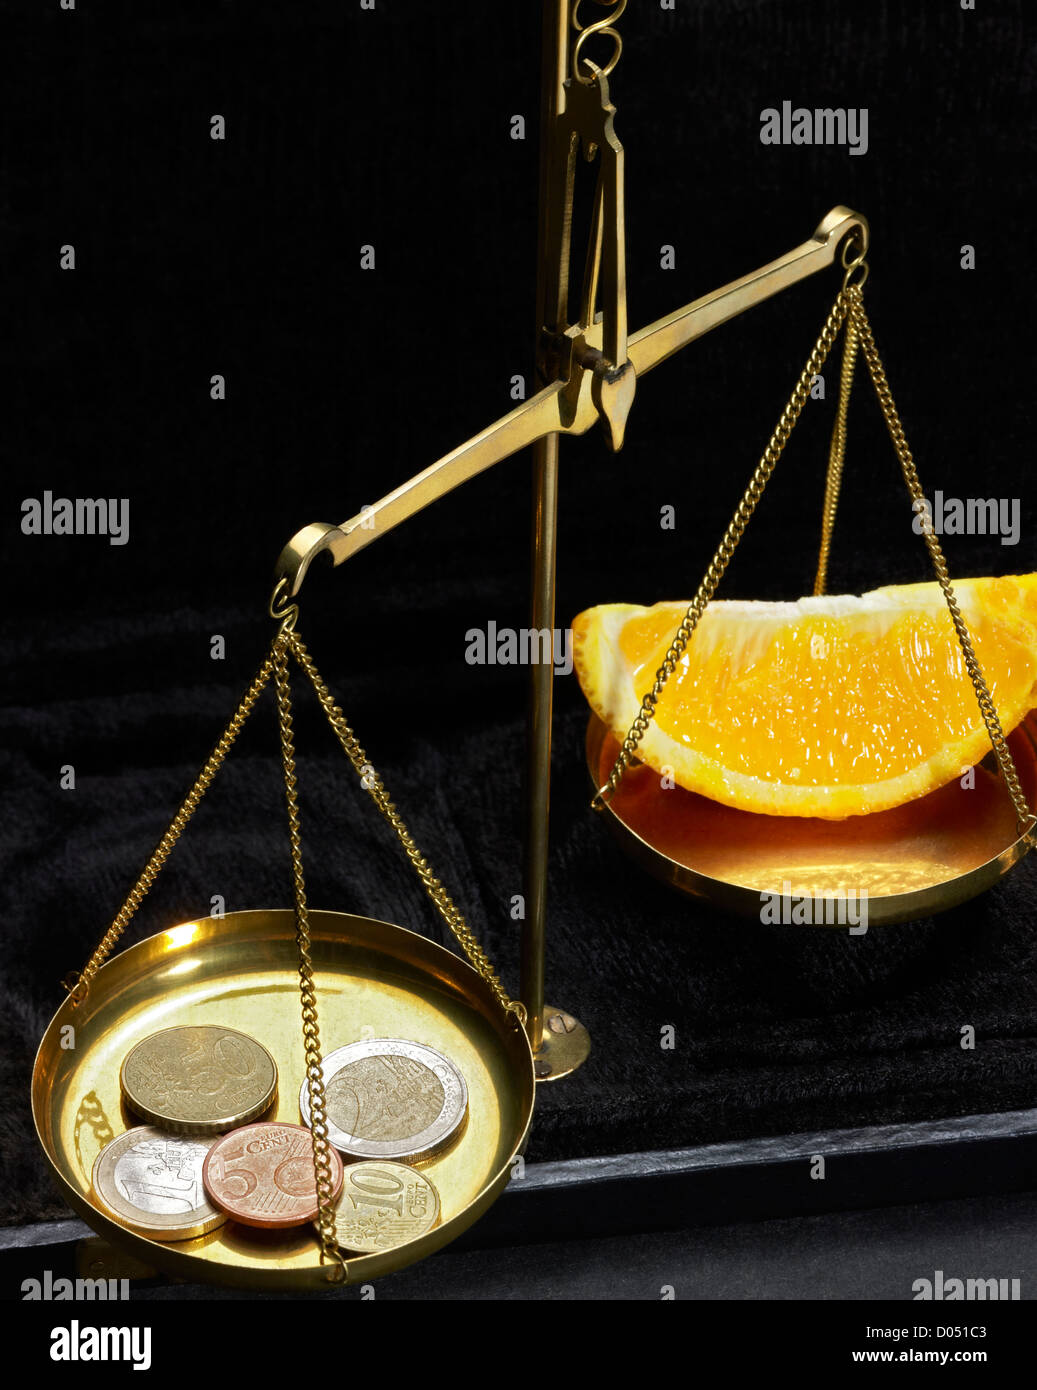 Salt In Amount Of 6 Grams On Small Digital Scale Comparing With One Euro  Coin Stock Photo, Picture and Royalty Free Image. Image 102495343.